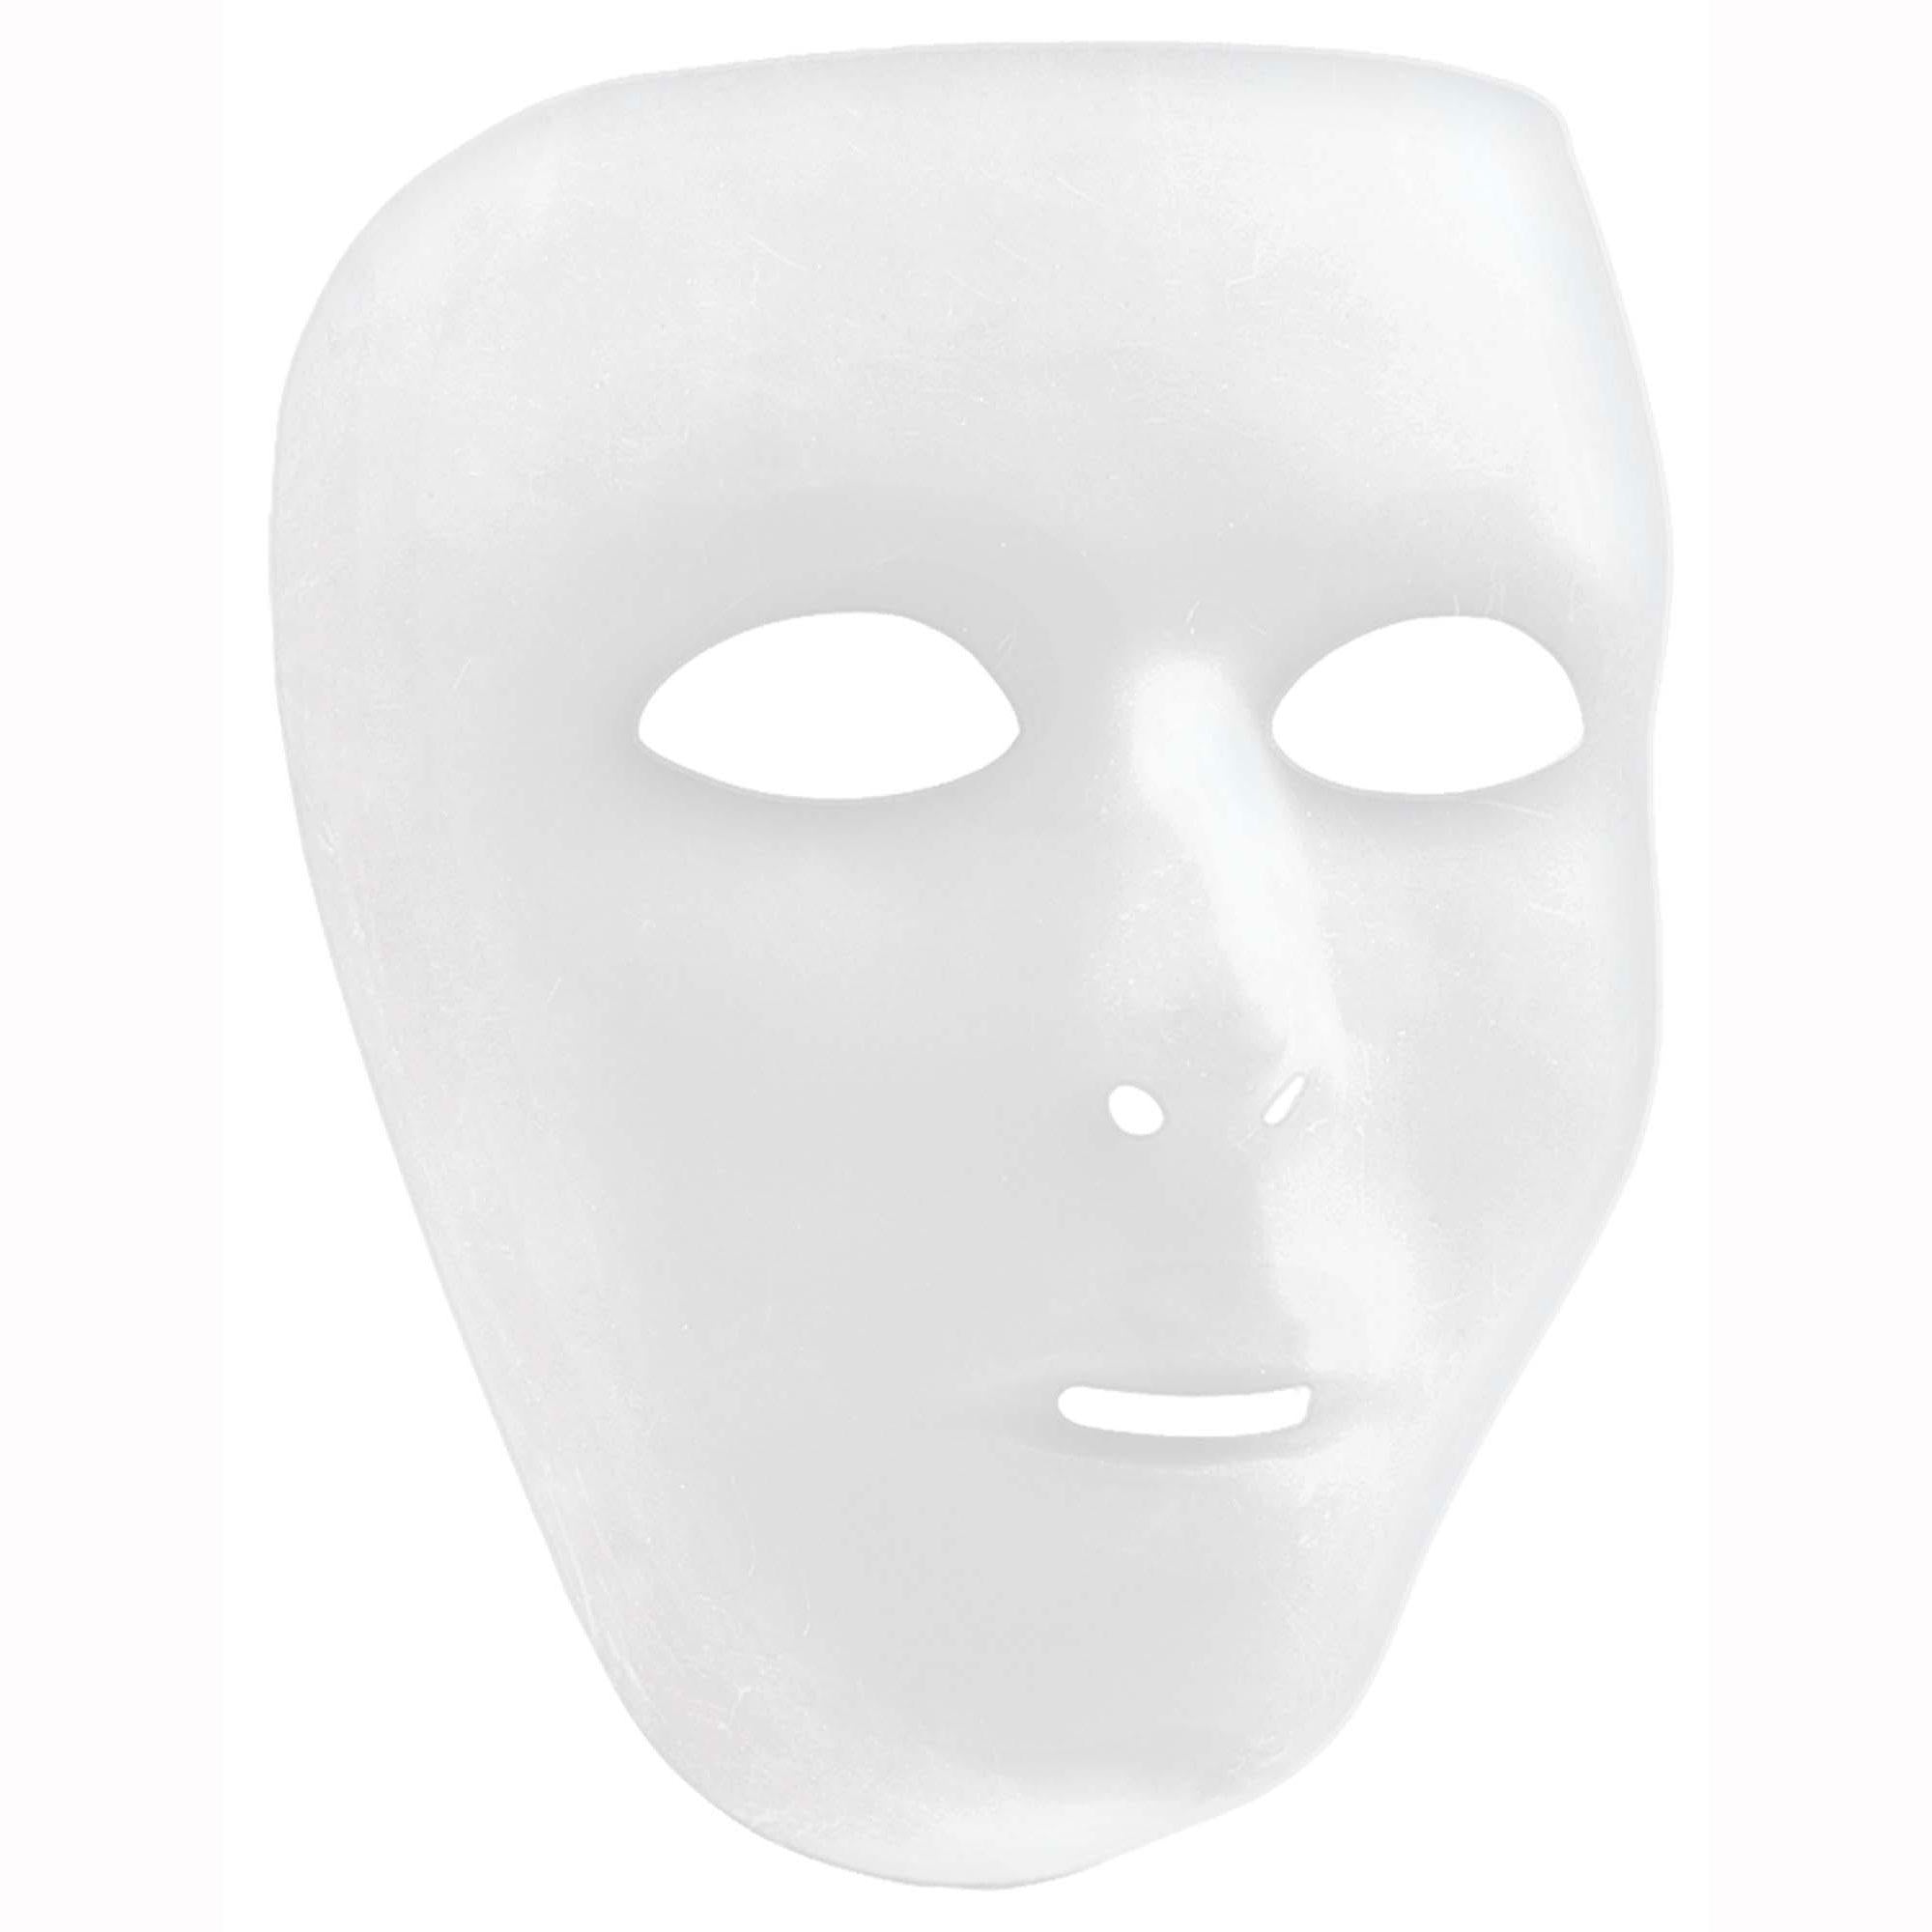 Basic White Mask Costumes & Apparel - Party Centre